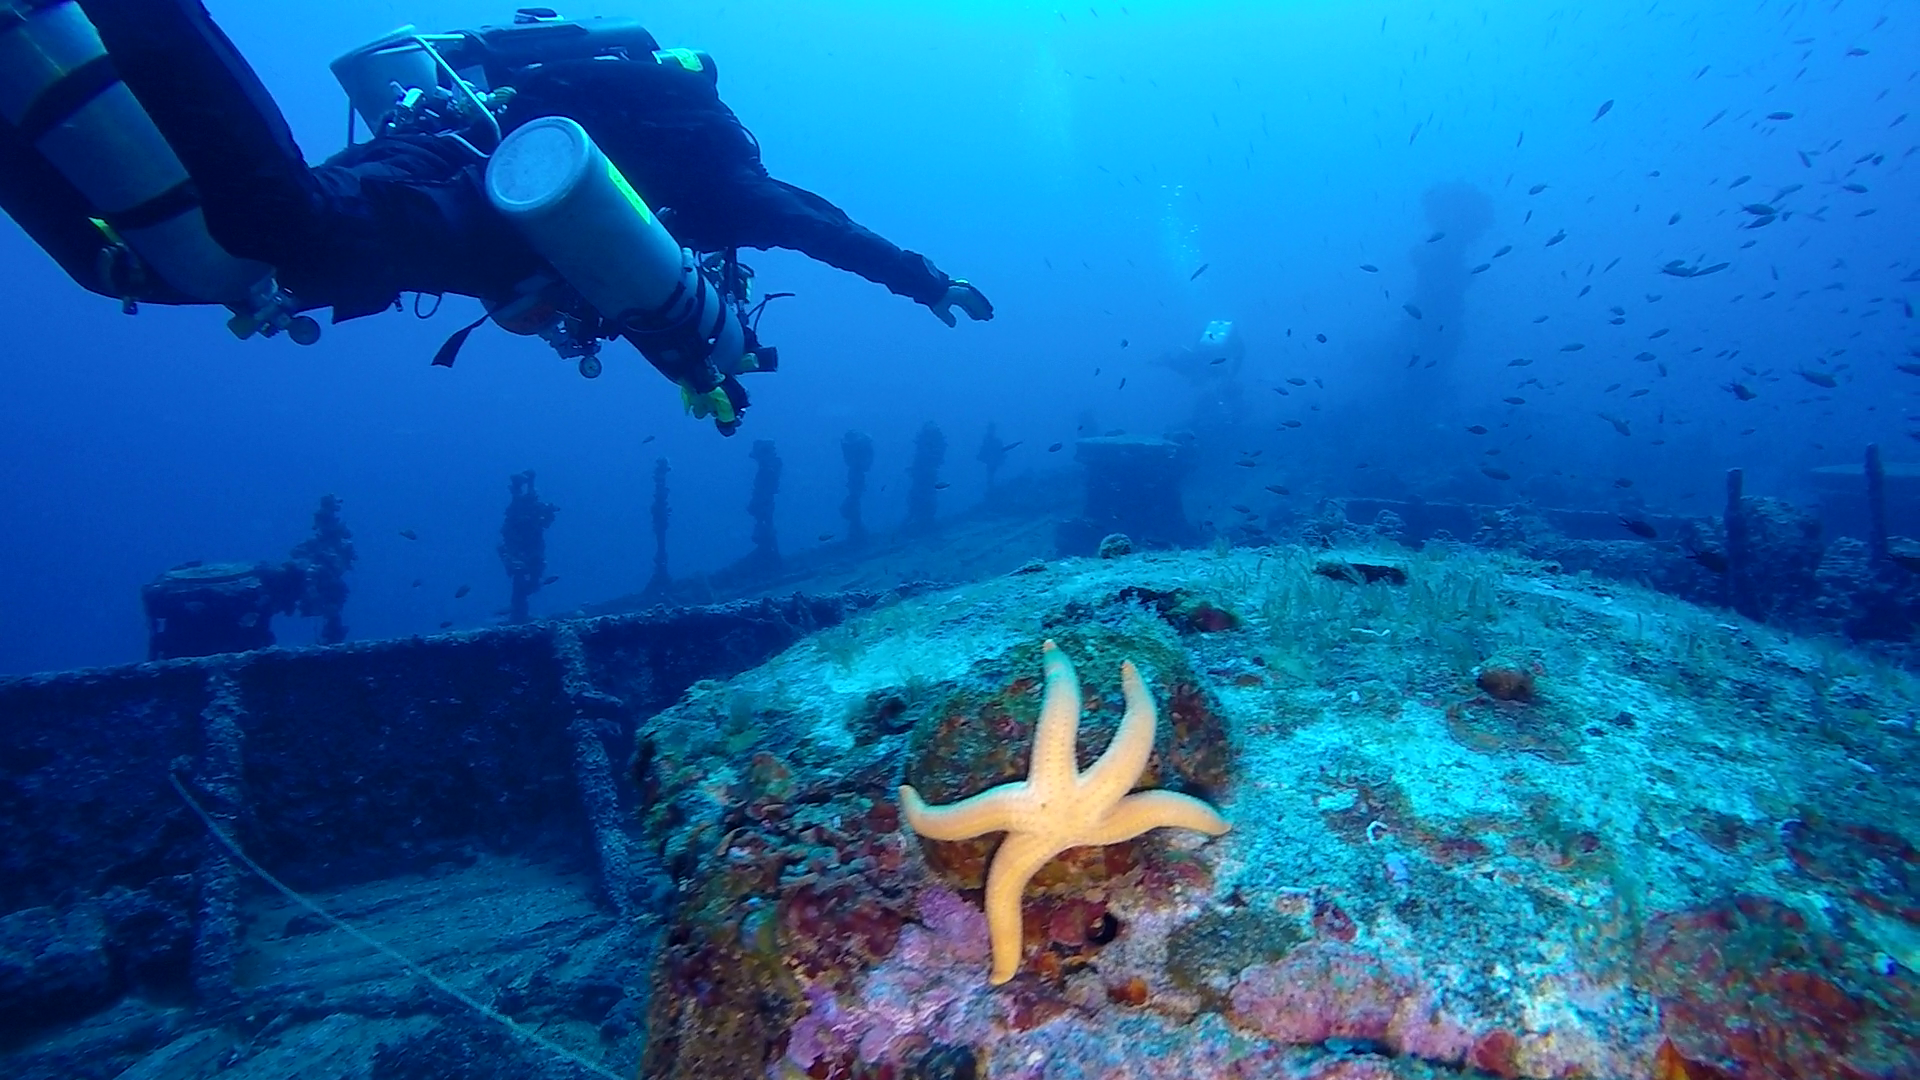 A diver floats over a starfish on the deck of the Burdigala shipwreck near Kea, Greece